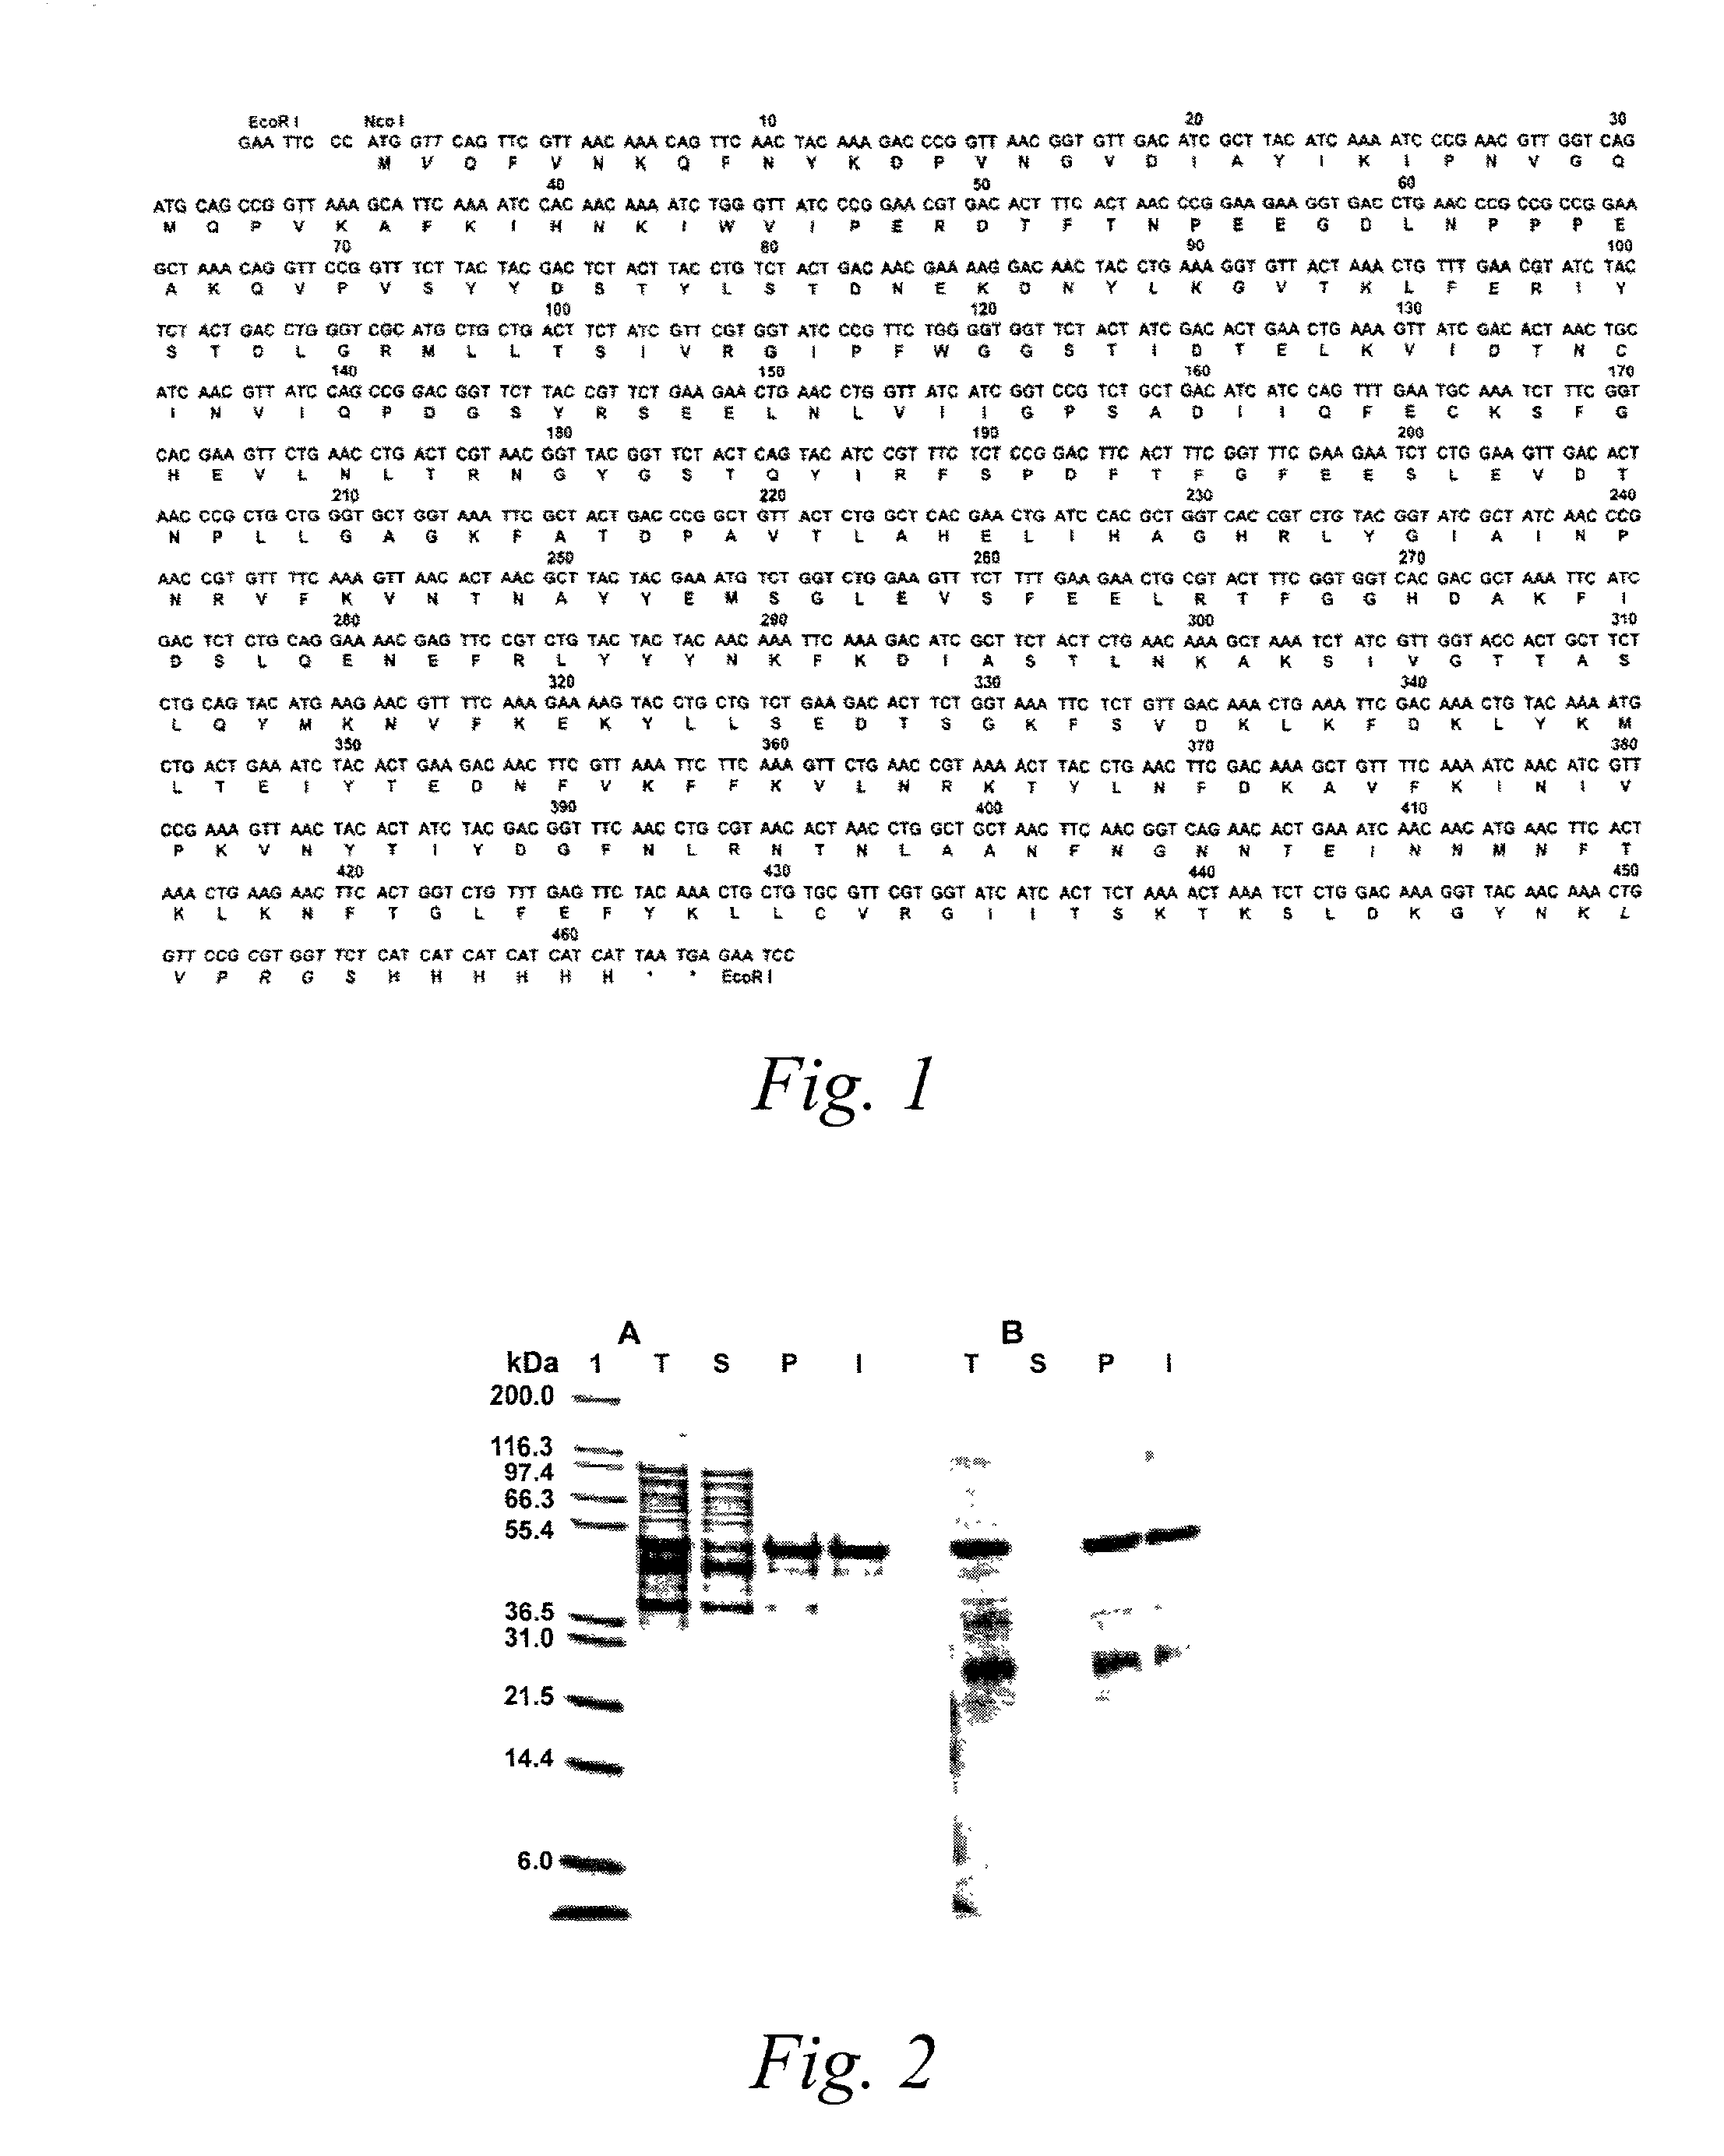 Recombinant light chains of botulinum neurotoxins and light chain fusion proteins for use in research and clinical therapy